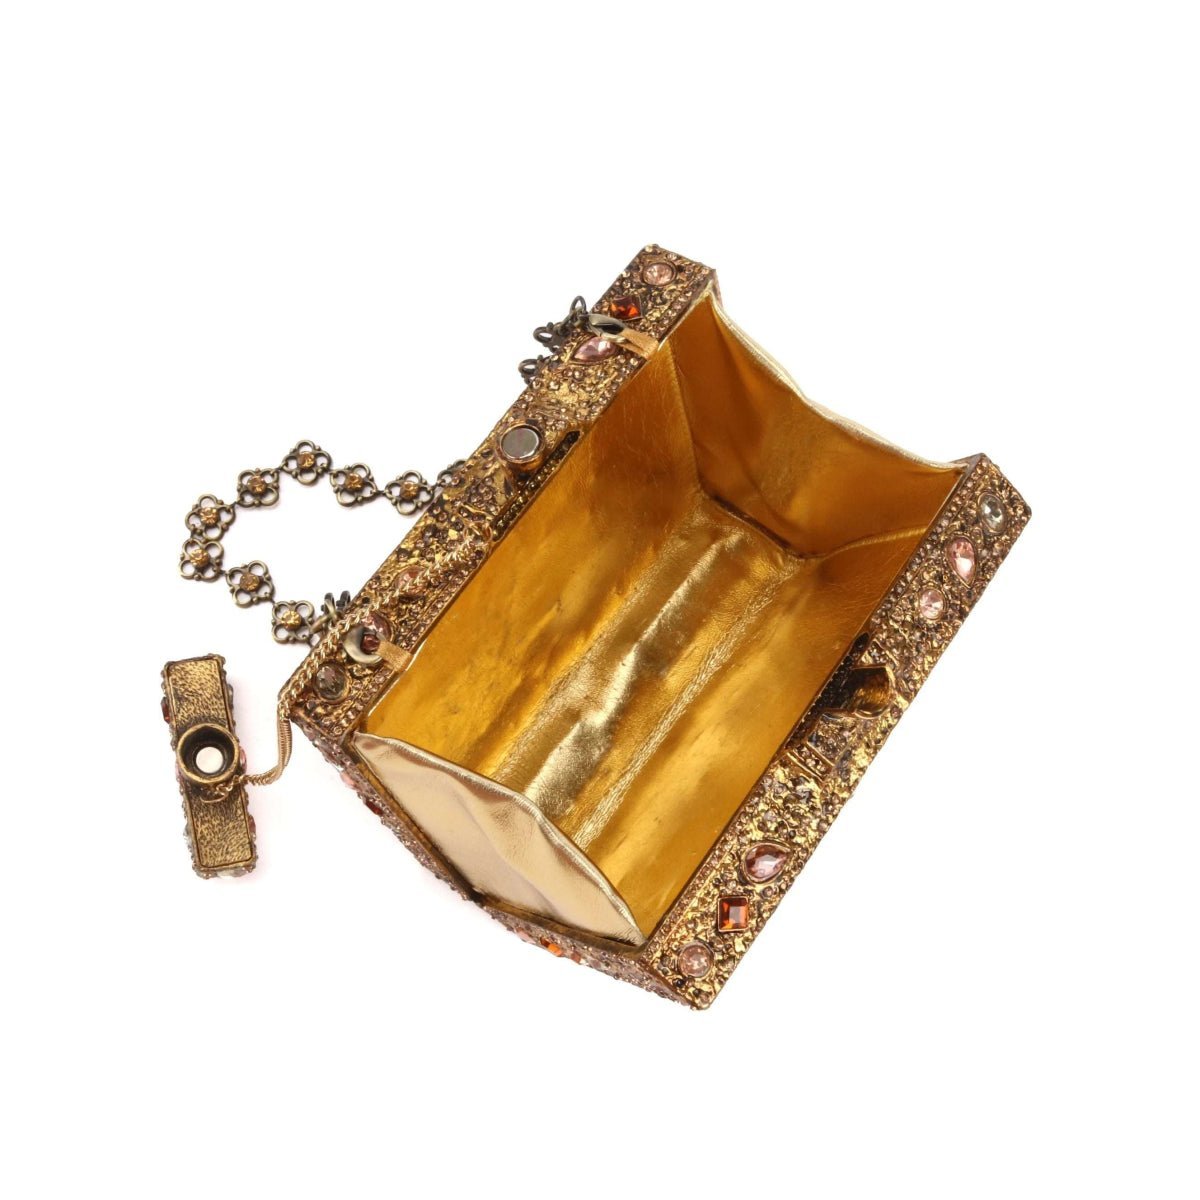 Crystal Perfume Bottle Novelty Clutch - Uniquely You Online - Clutch